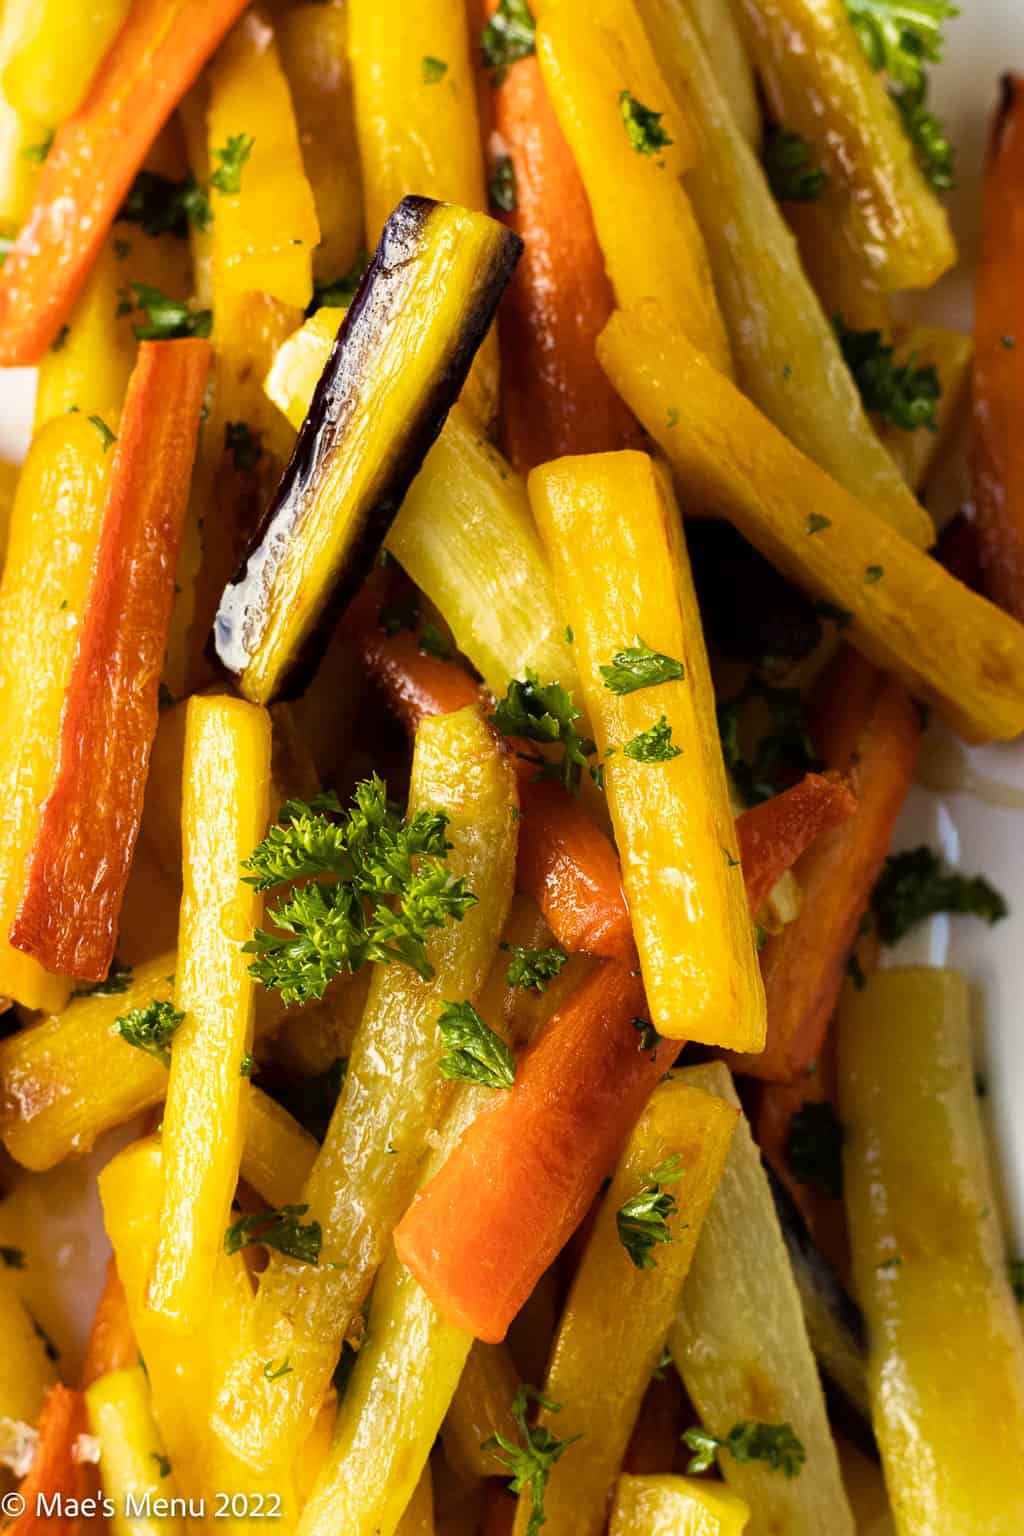 An up-close overhead shot of roasted rainbow carrots sprinkled with parsley.